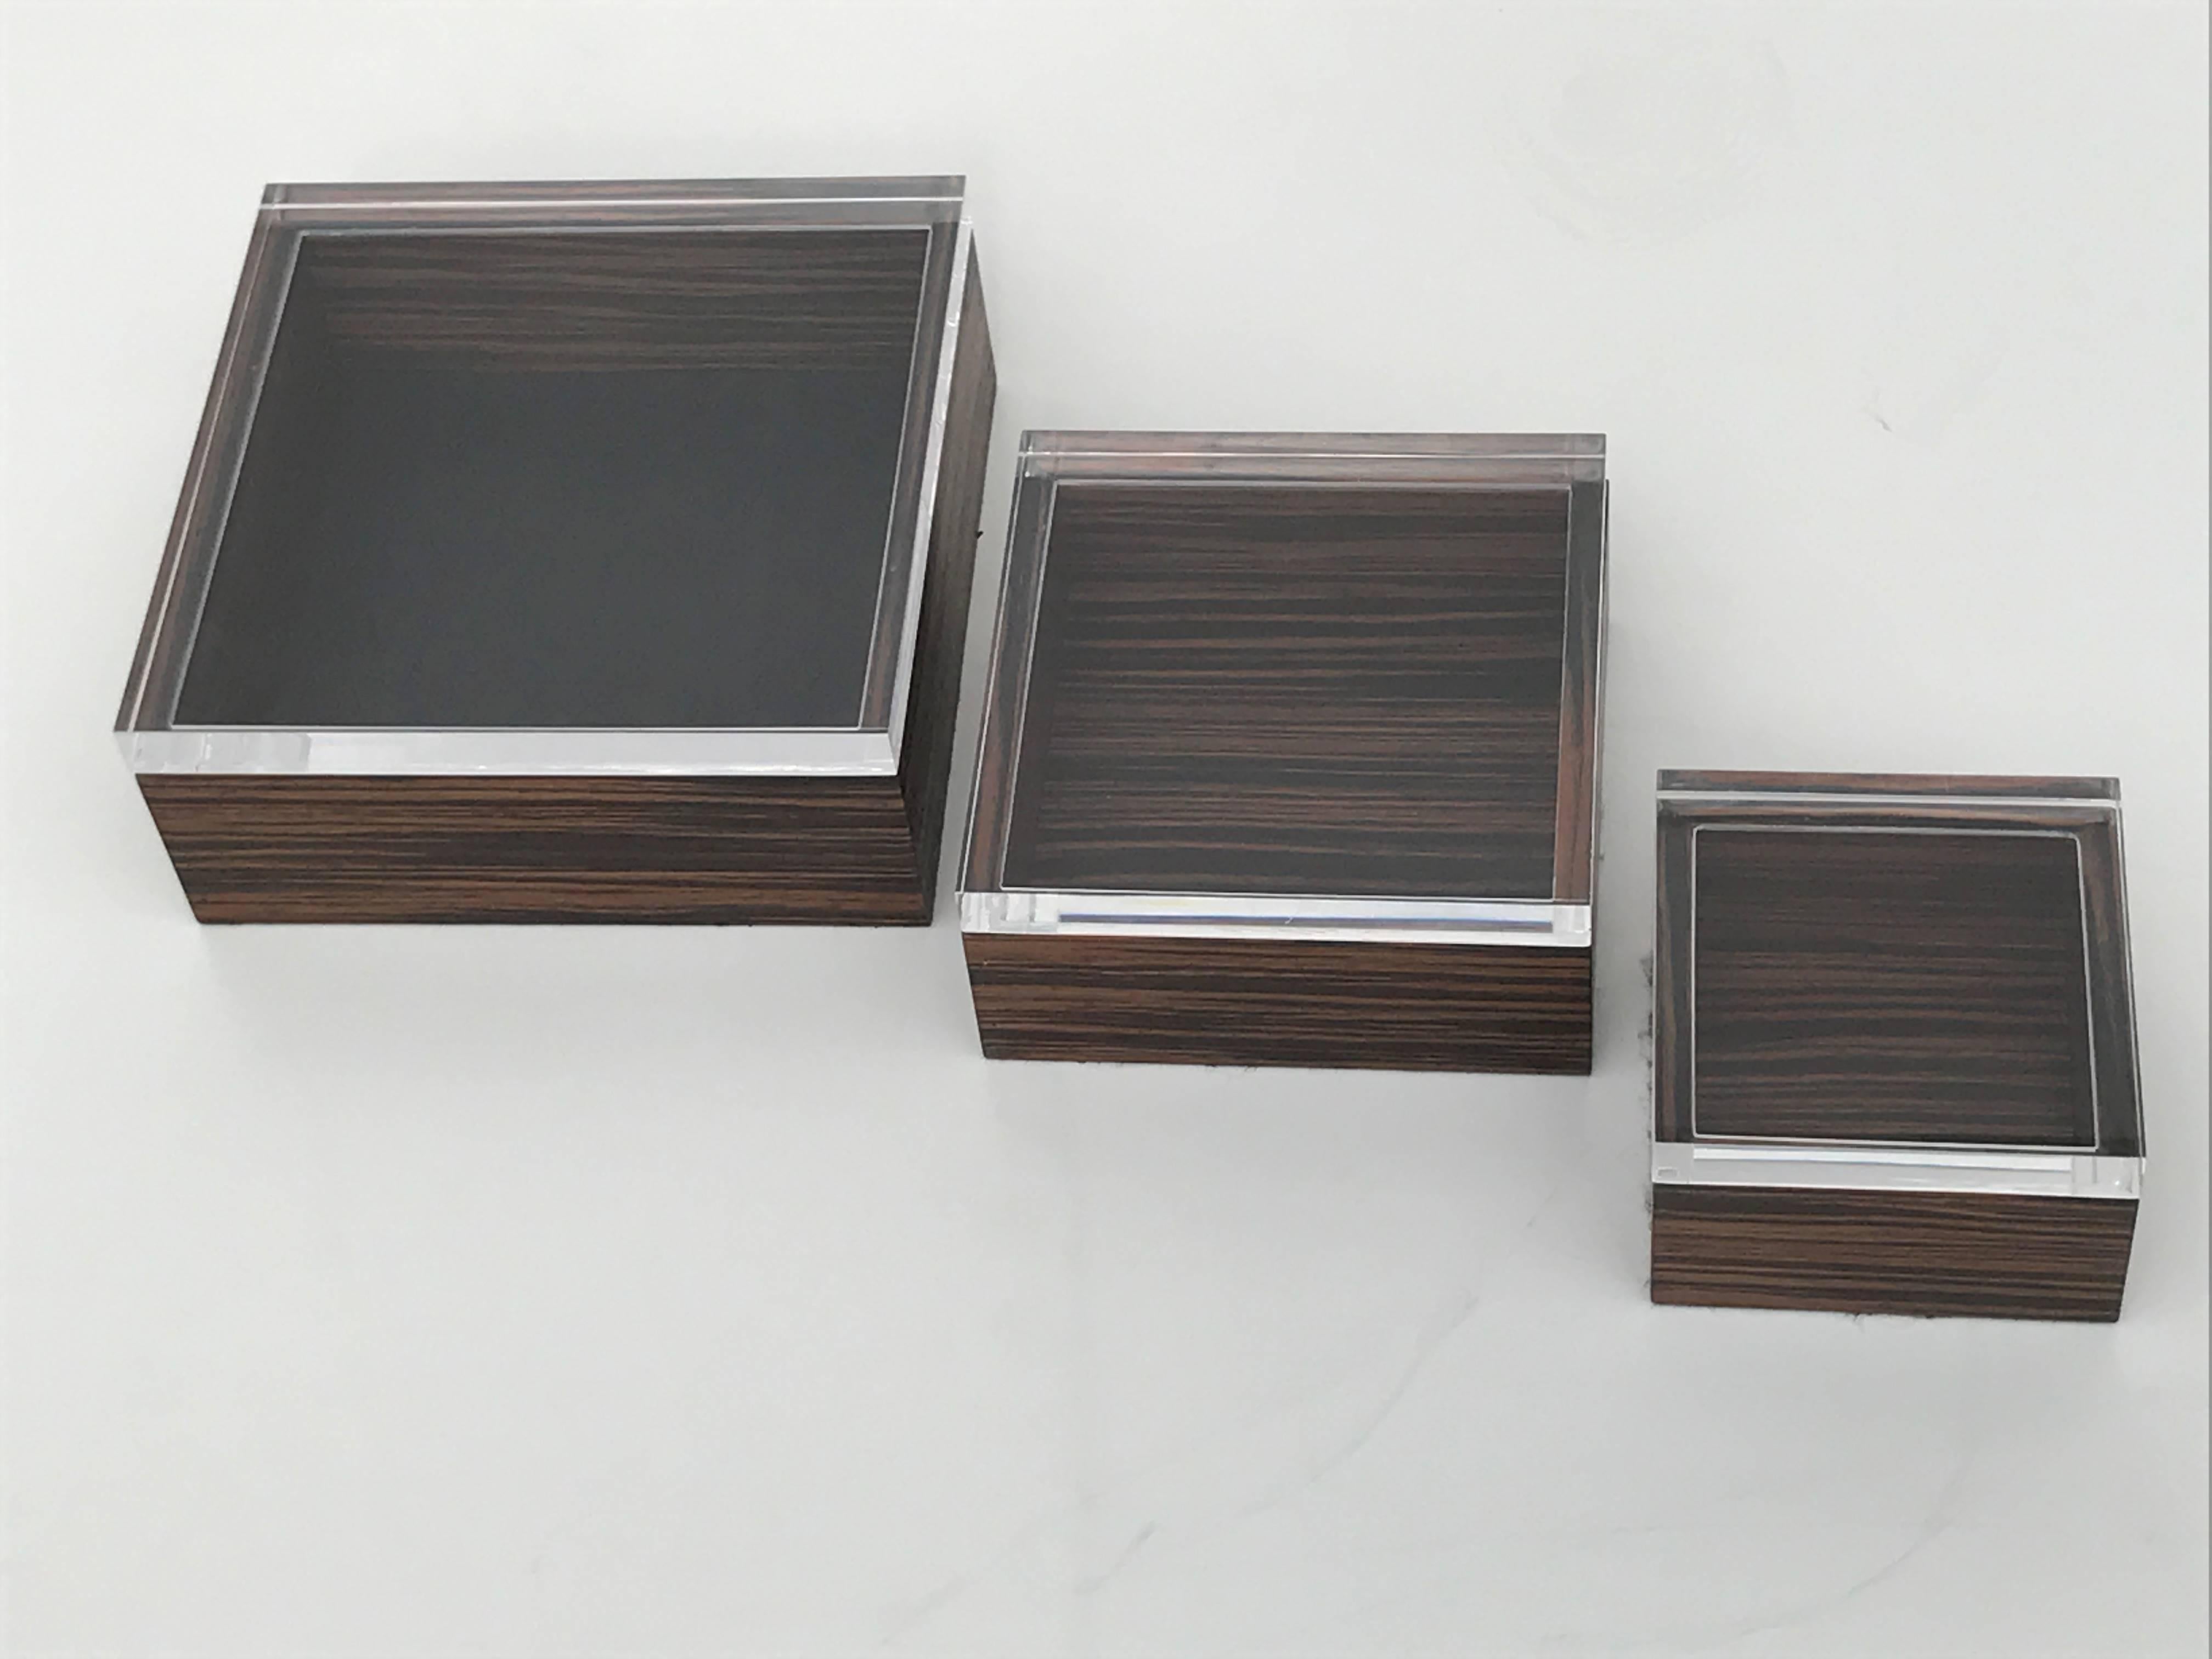 American Set of Three Macassar Ebony and Lucite Jewelry Boxes For Sale